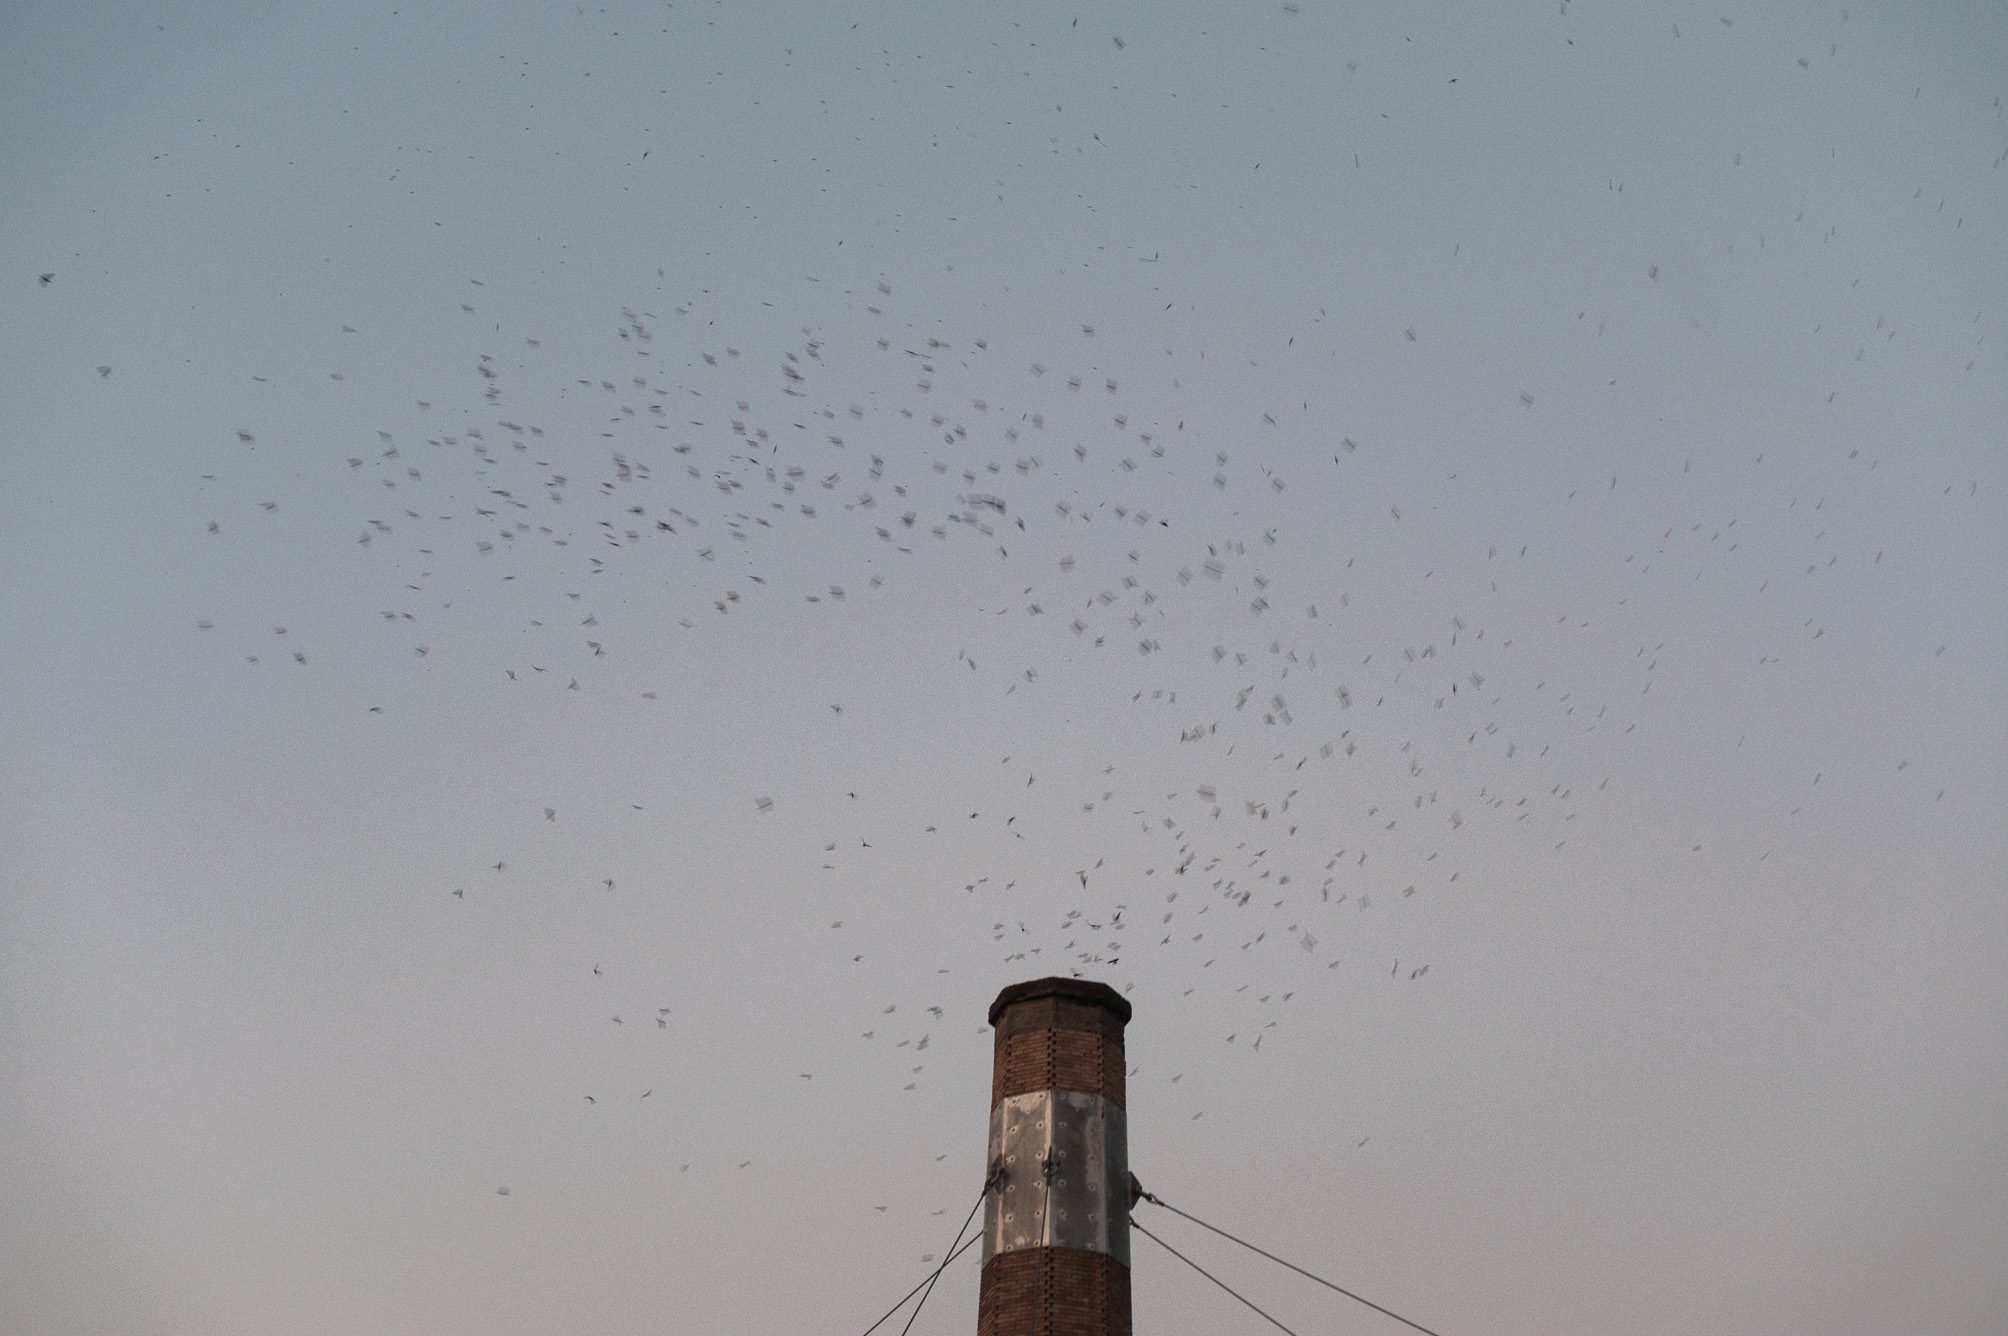 Thousands of Swifts descend into a chimney at dusk. Chapman School Swifts captured by photographer Briana Morrison